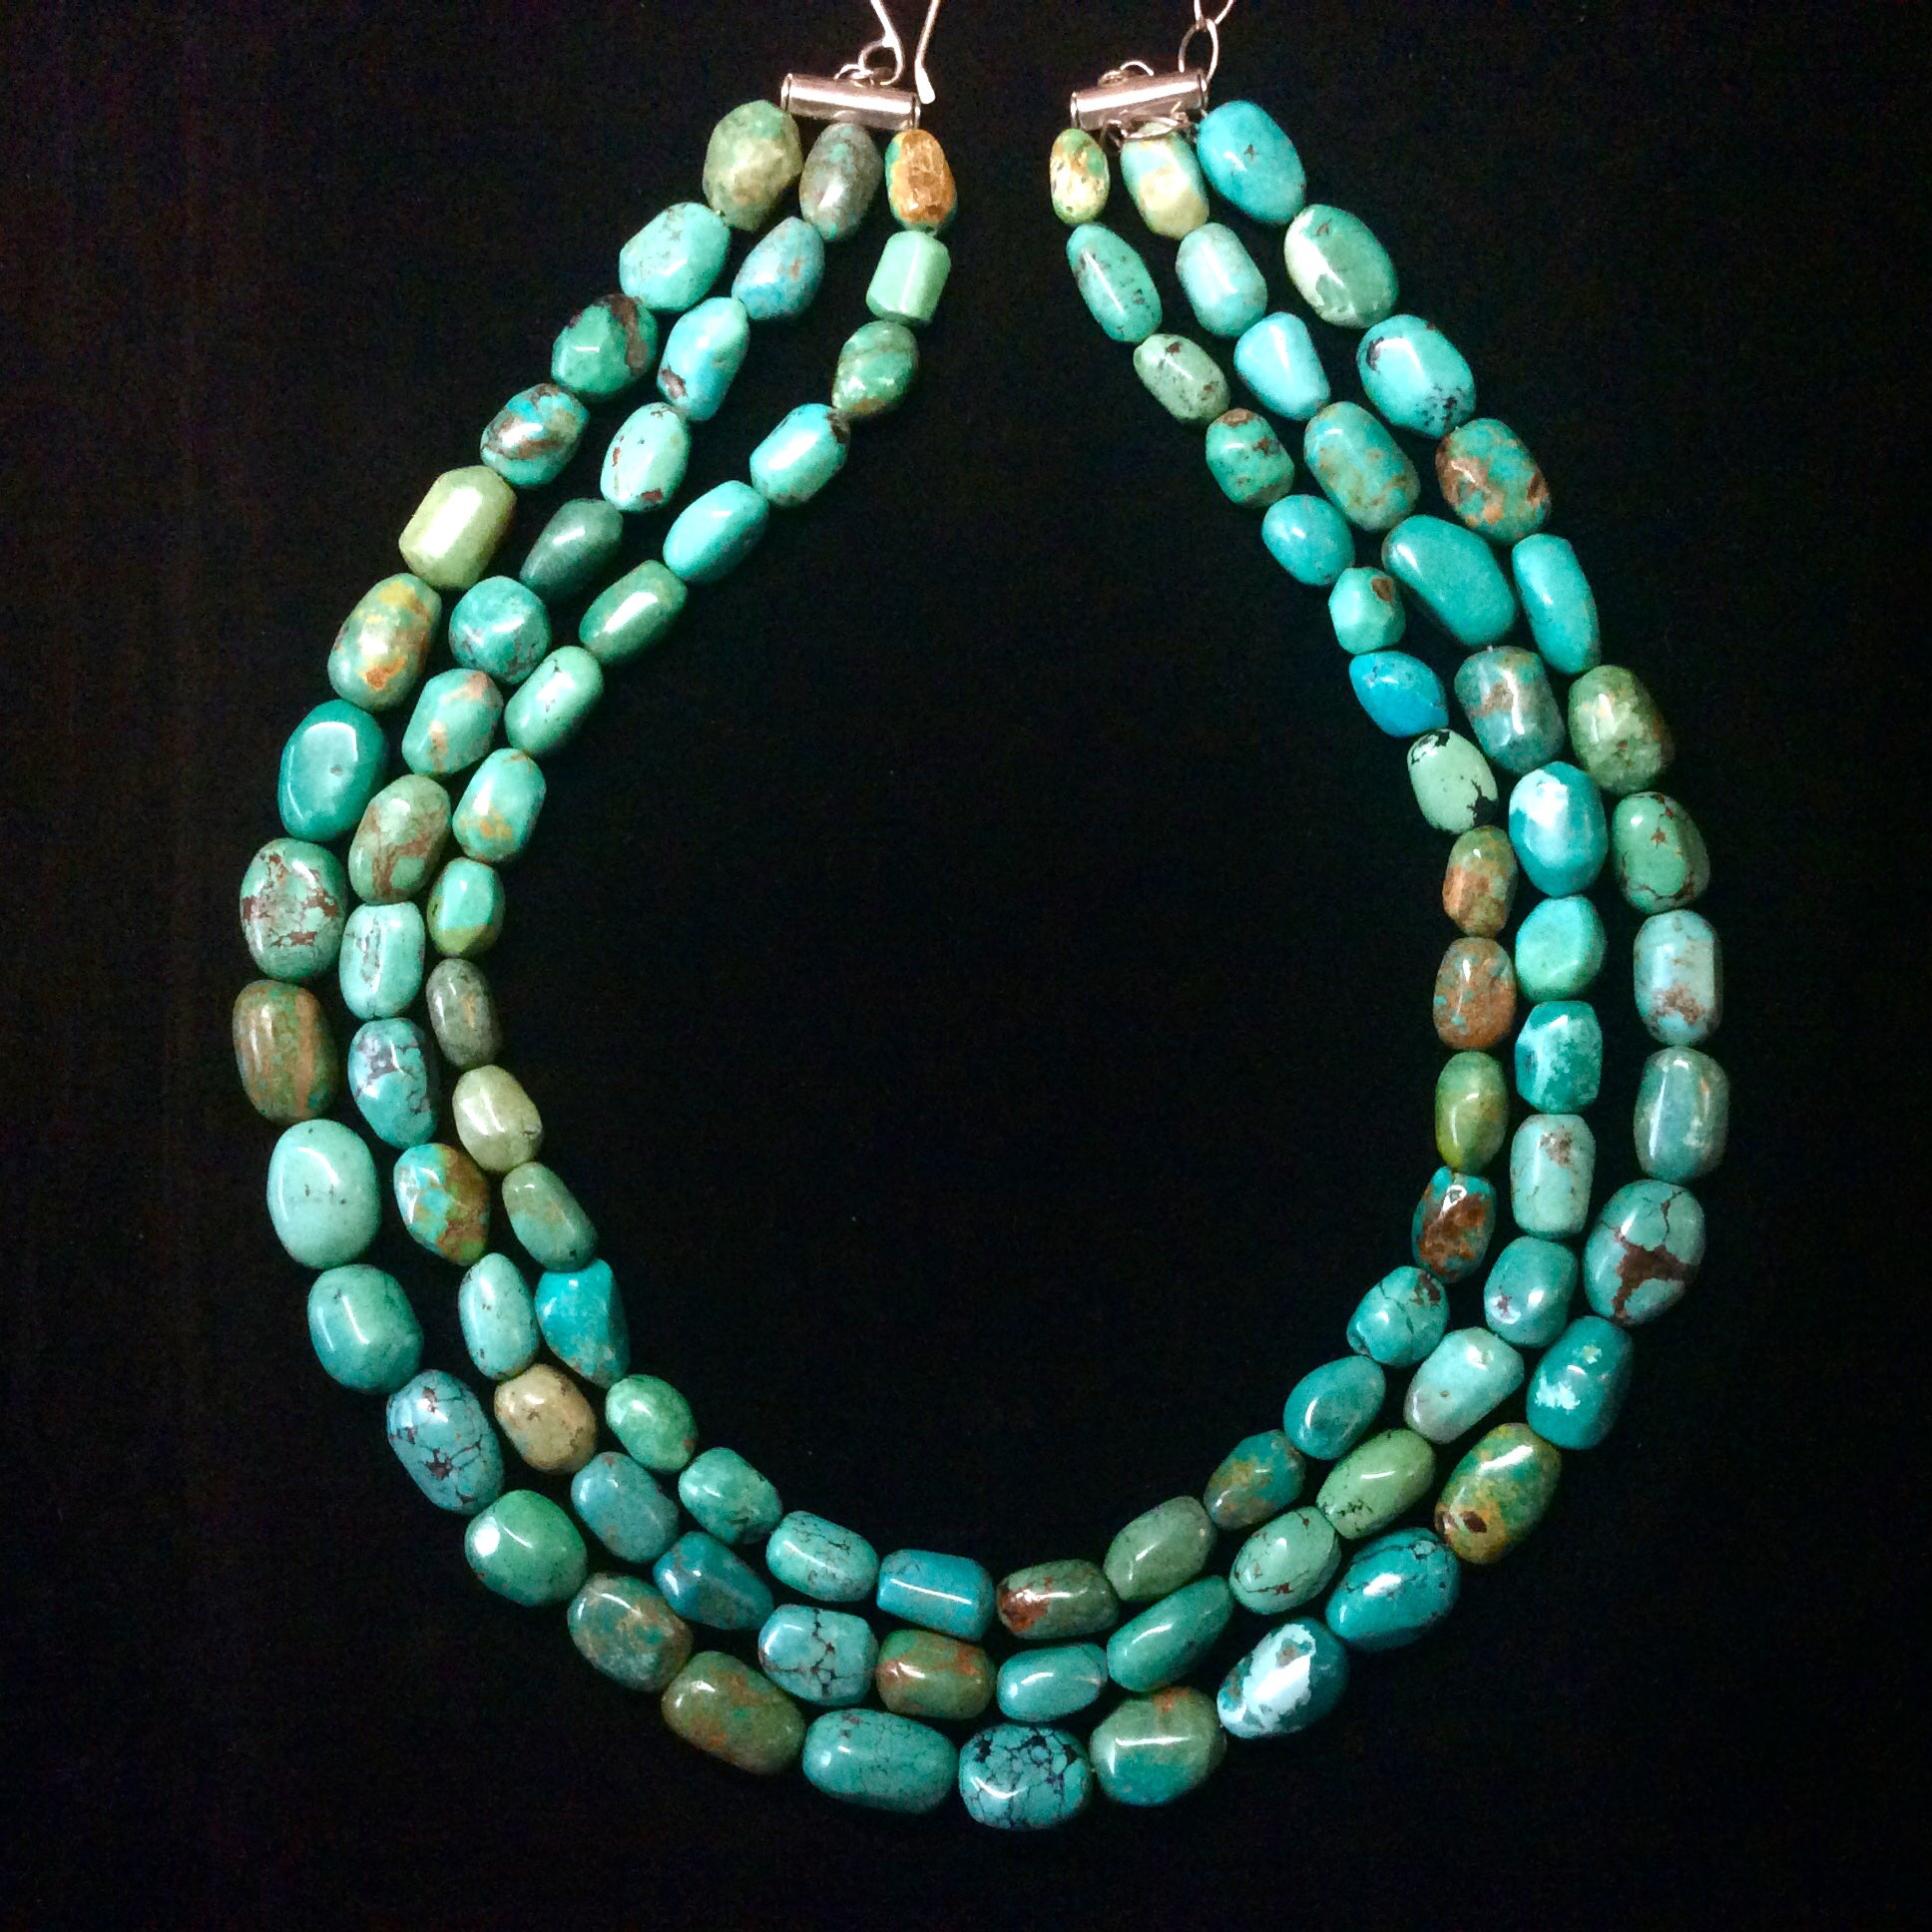 JAY KING TURQUOISE JEWELRY